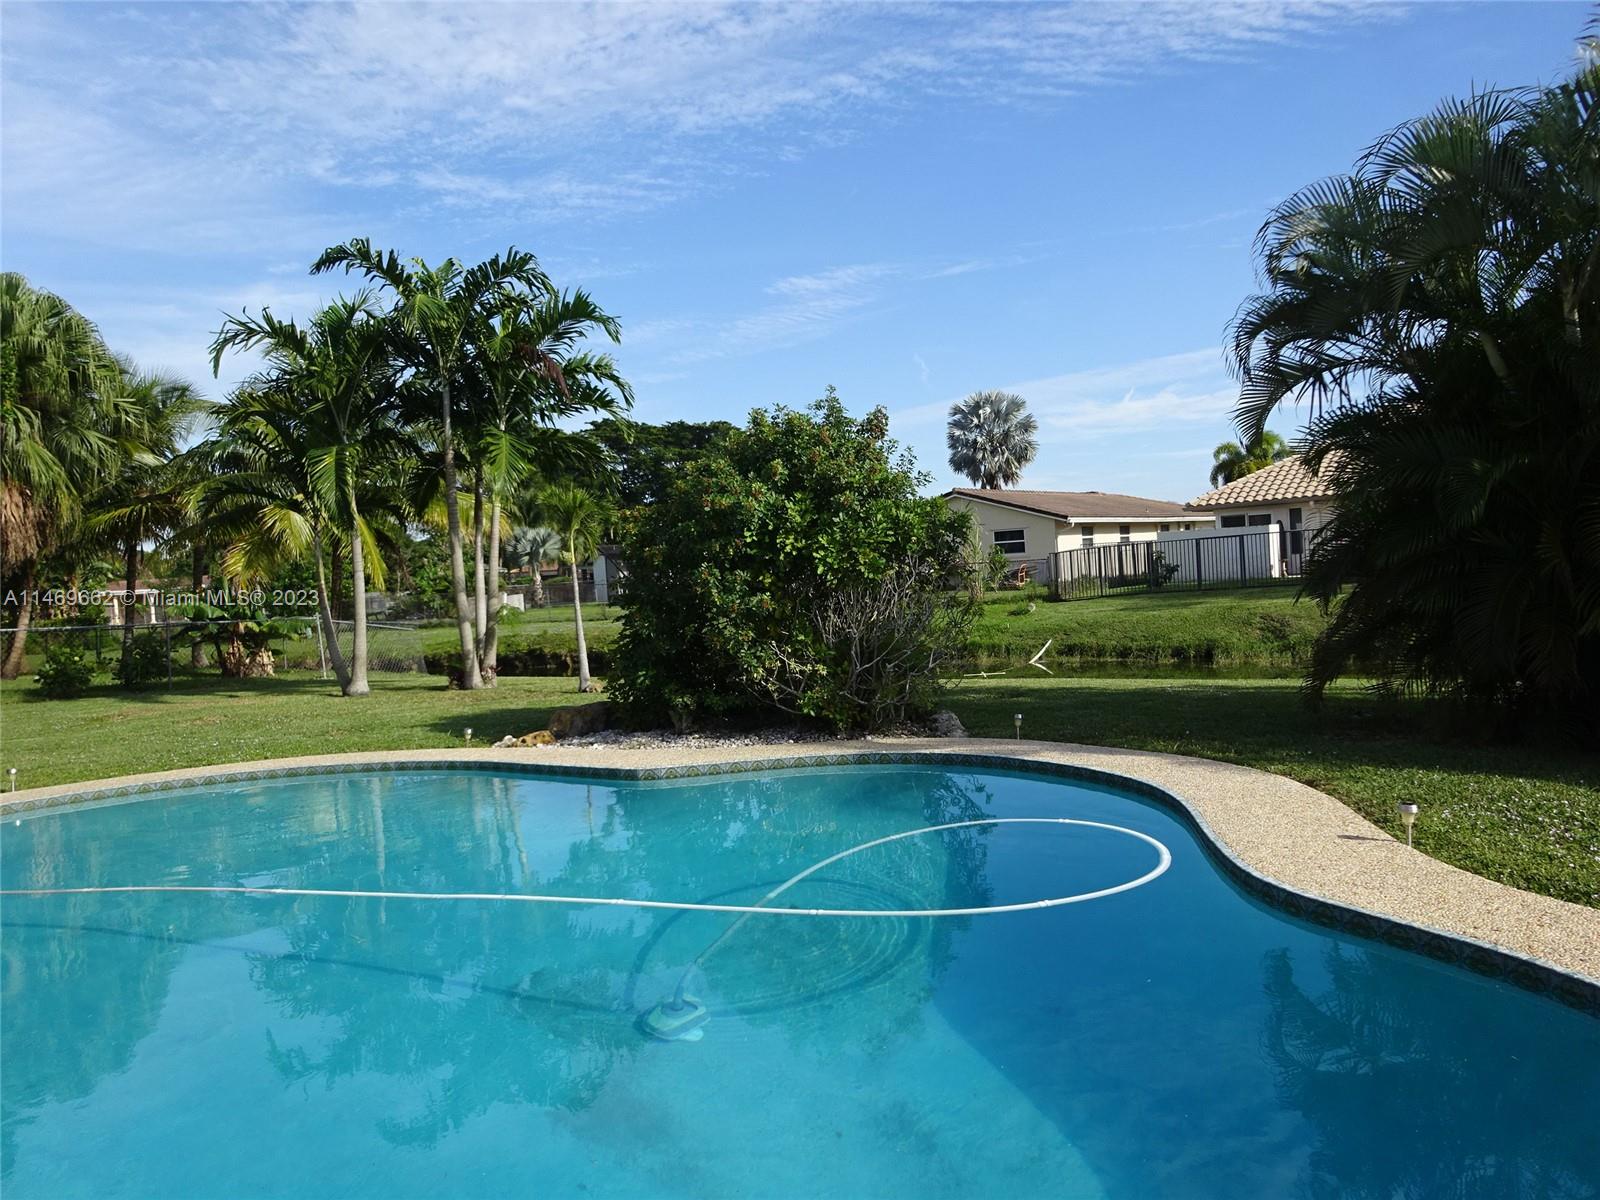 a view of a swimming pool and a yard